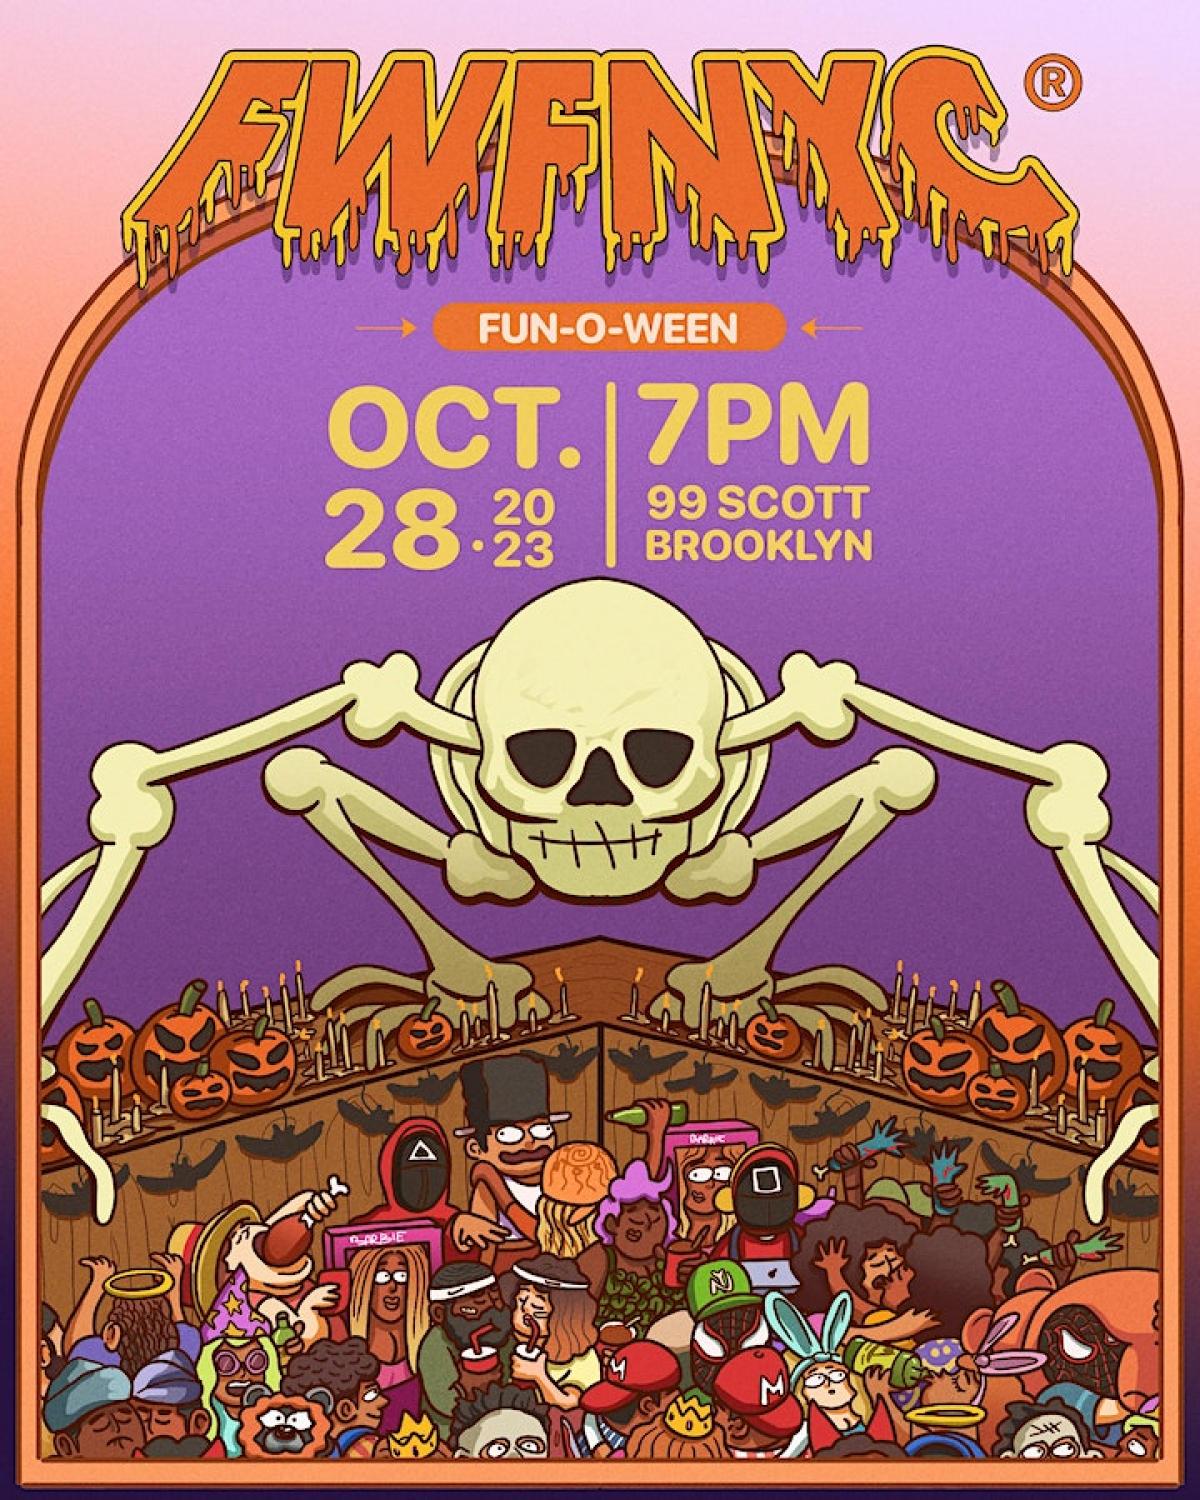 Fun-O-Ween flyer or graphic.